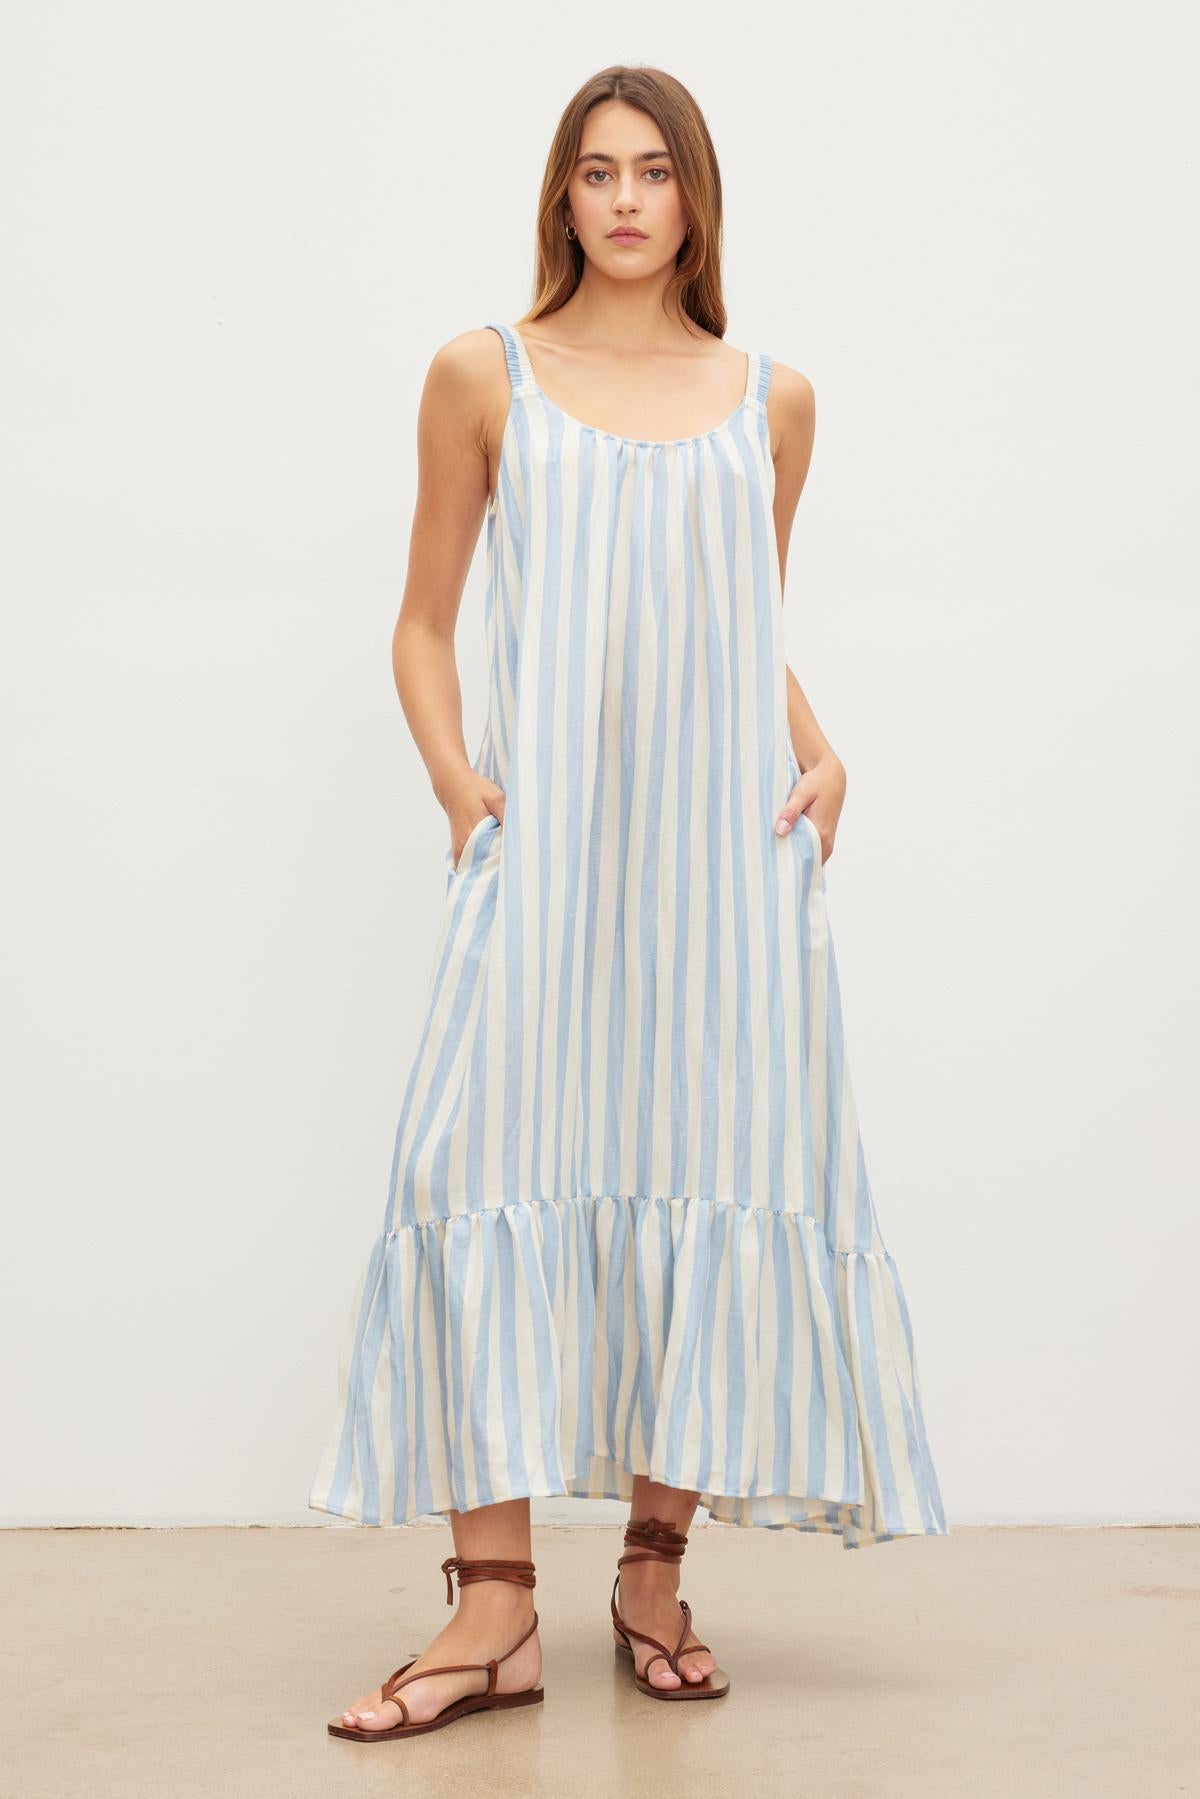 A woman stands against a plain background wearing a Velvet by Graham & Spencer MERADITH STRIPED LINEN MAXI DRESS with ruffle hem and brown sandals.-36580695441601